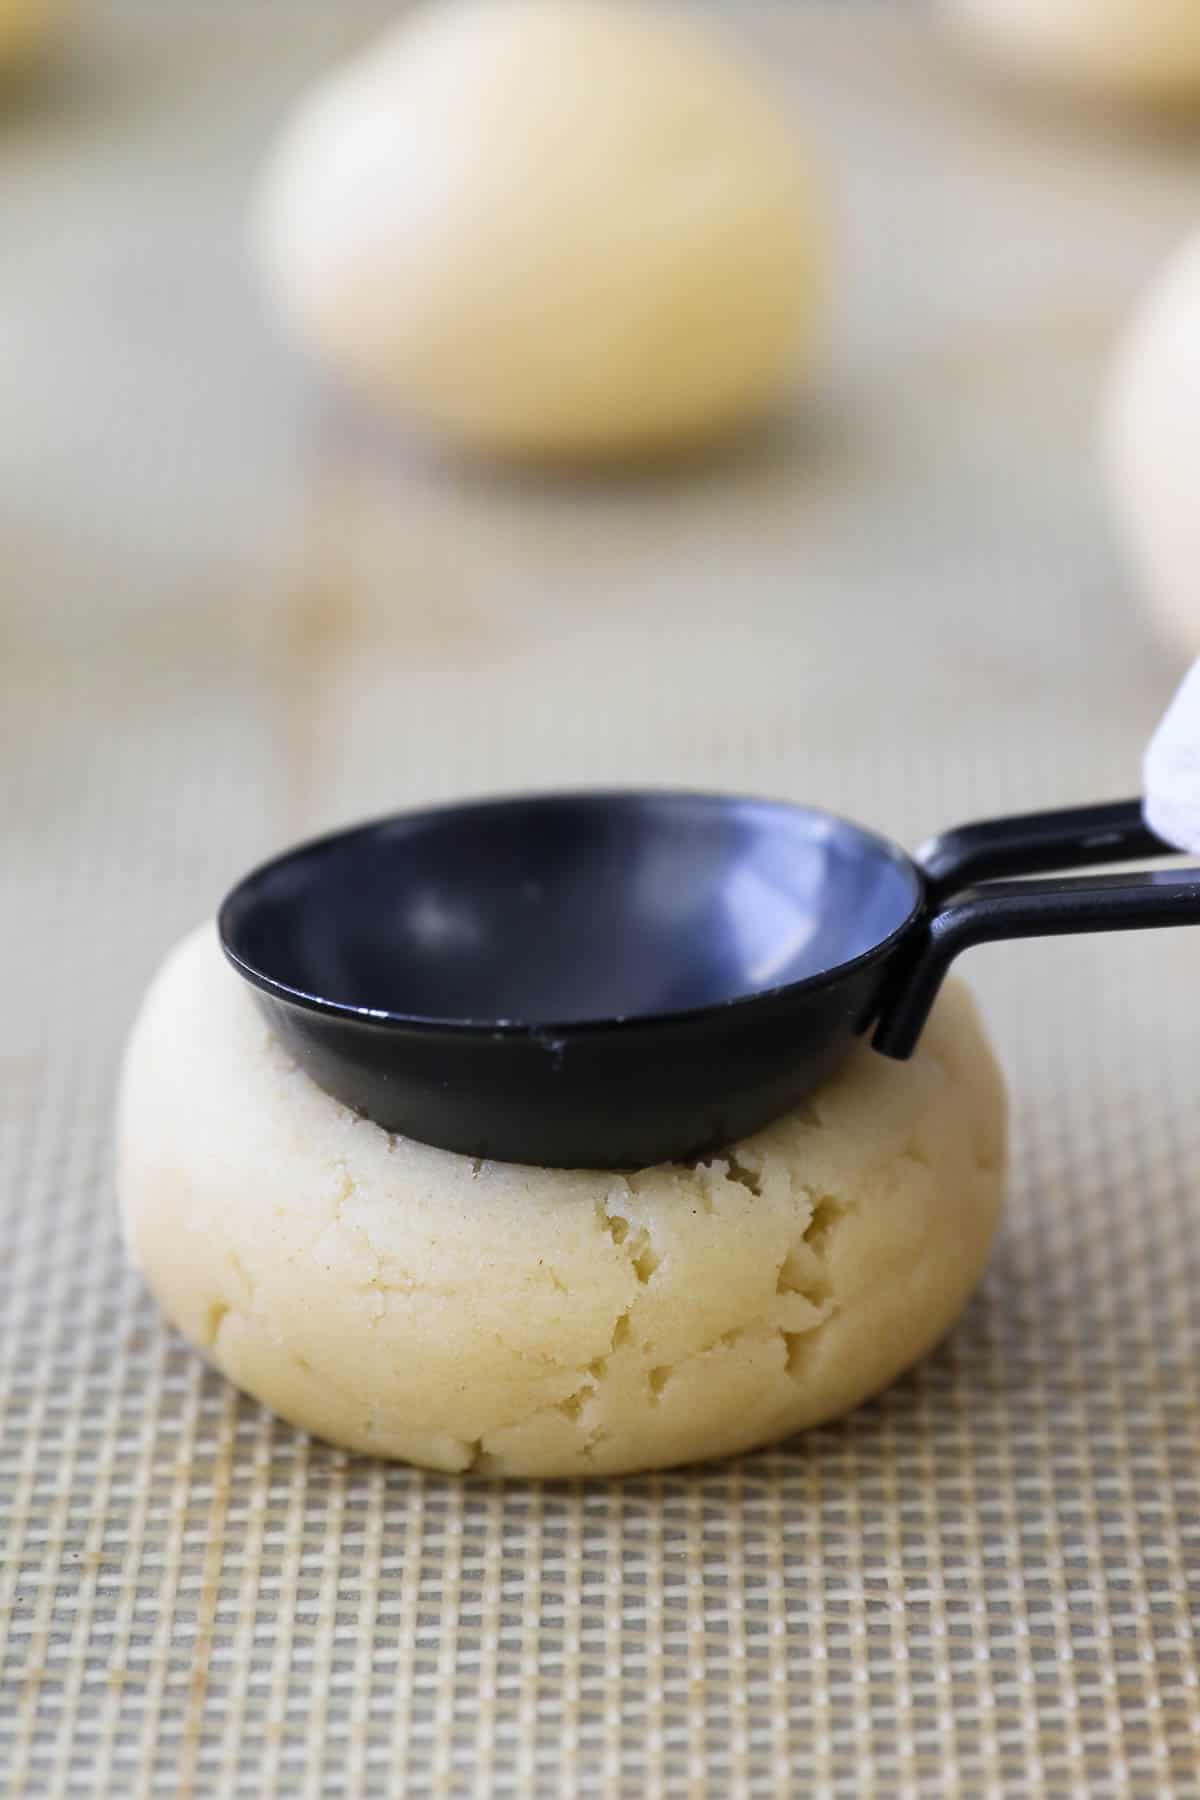 A teaspoon is used to press an indent into the top of a cookie dough ball.